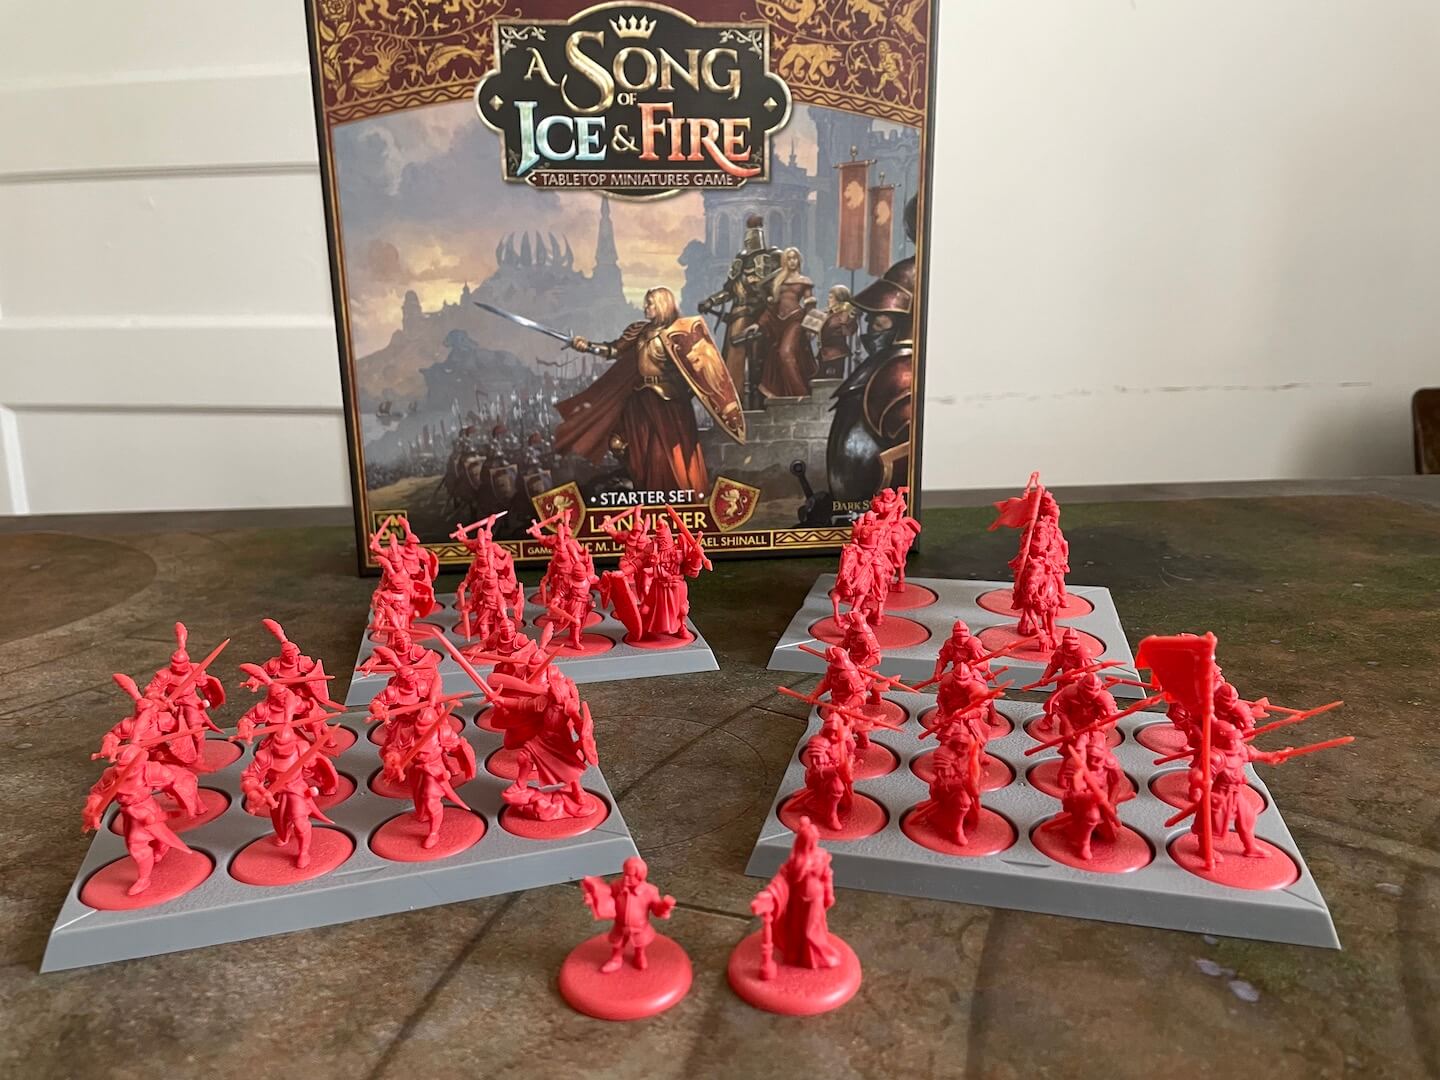 Miniatures on display in the Song of Ice and Fire Lannister Starter Set